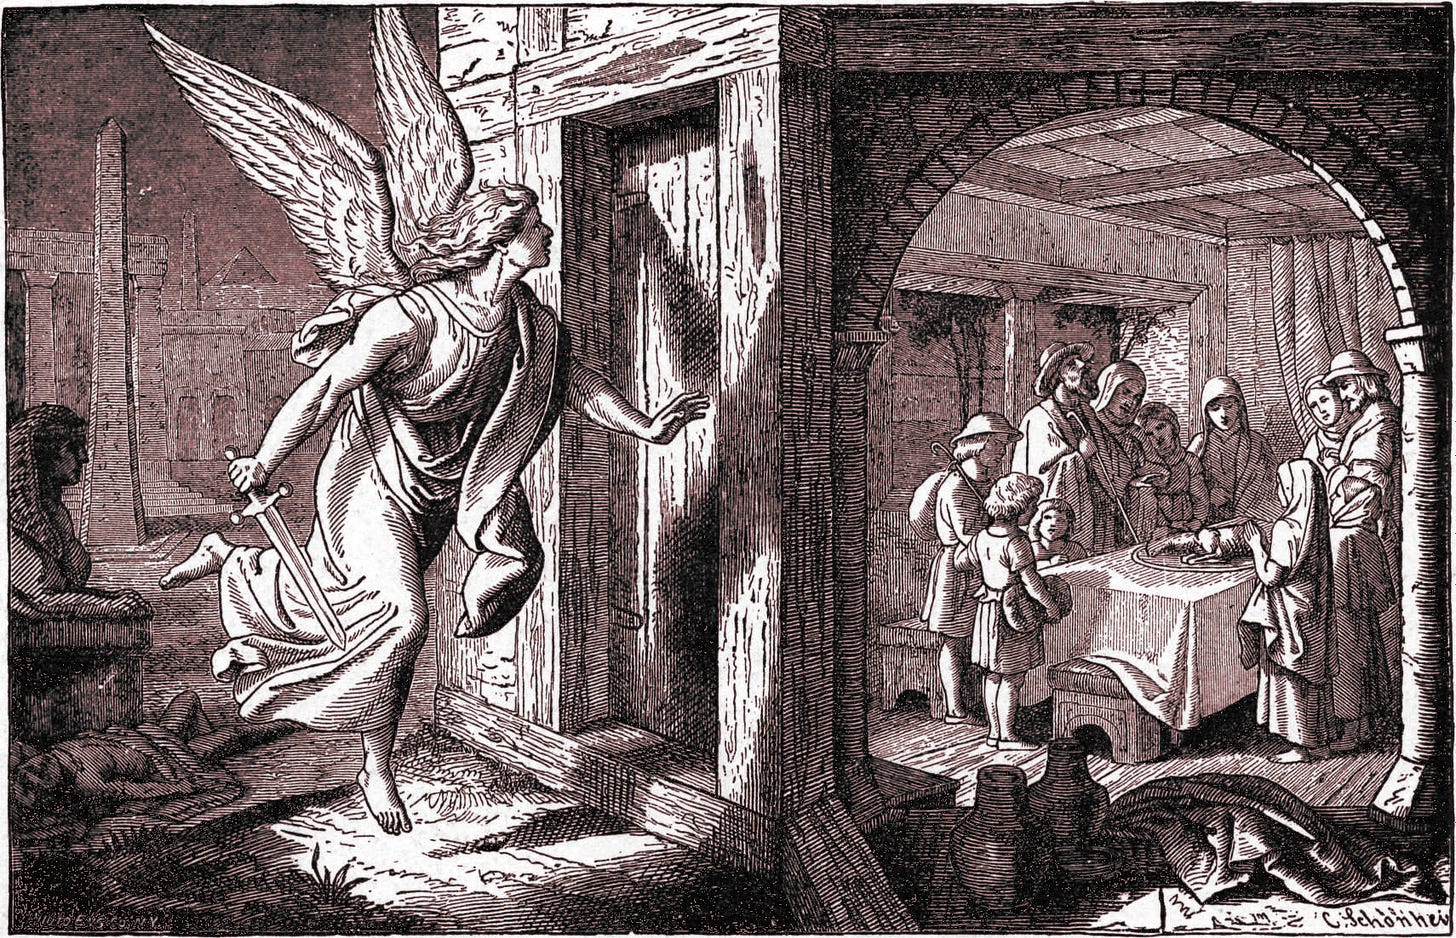 Illustration of an angel carrying a sword approaching a house with people eating inside